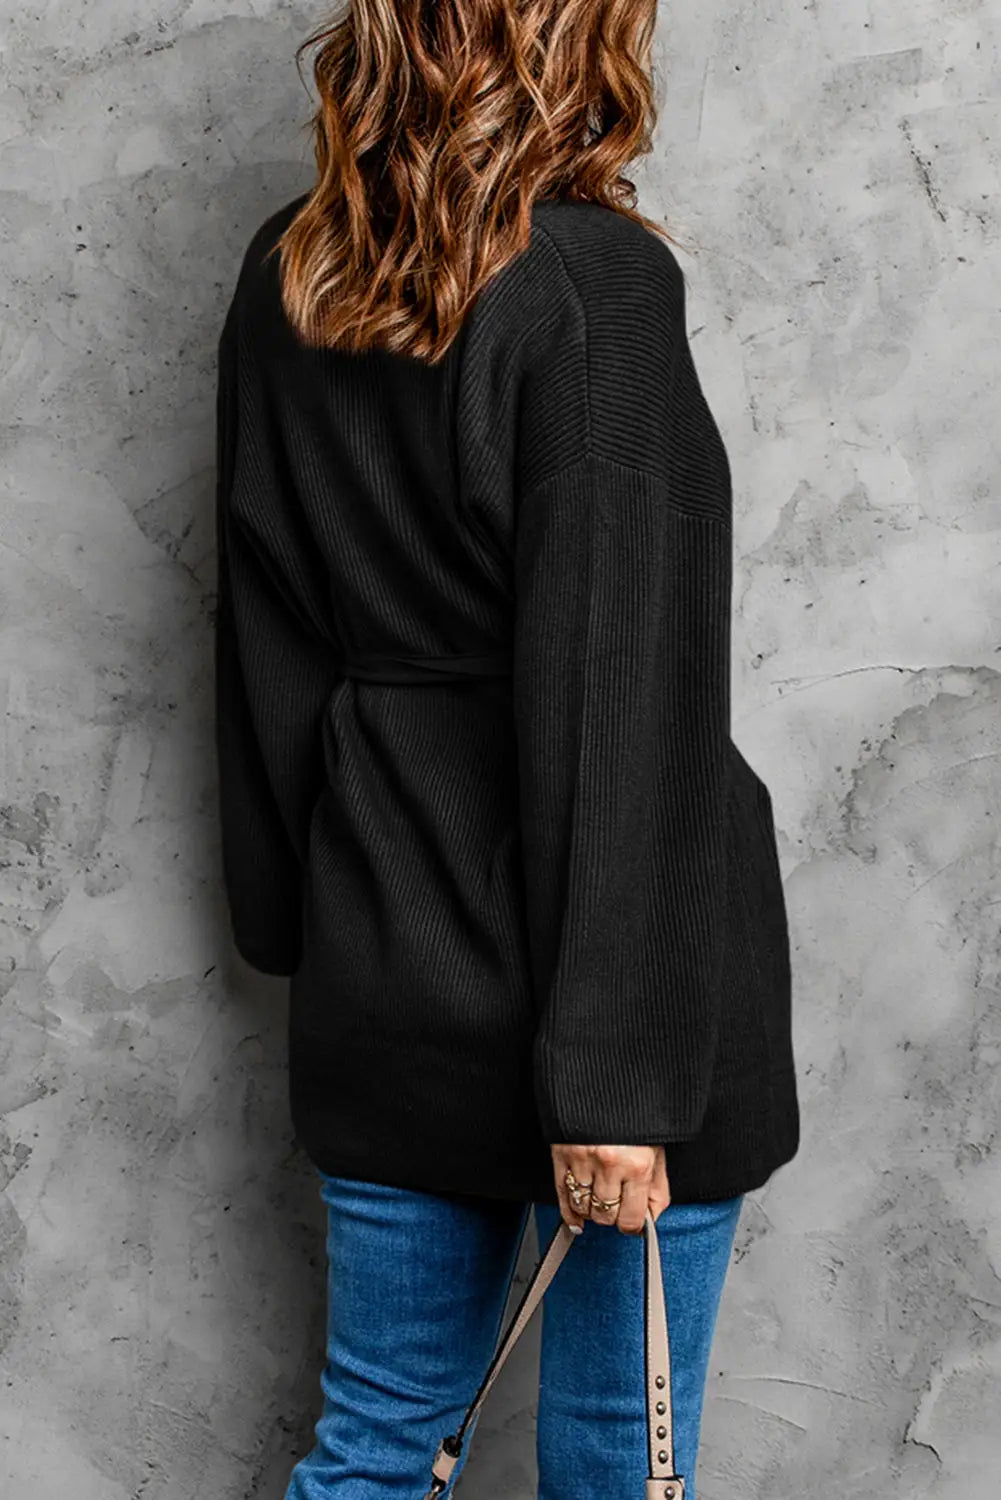 Black robe style rib knit pocketed cardigan with belt - sweaters & cardigans